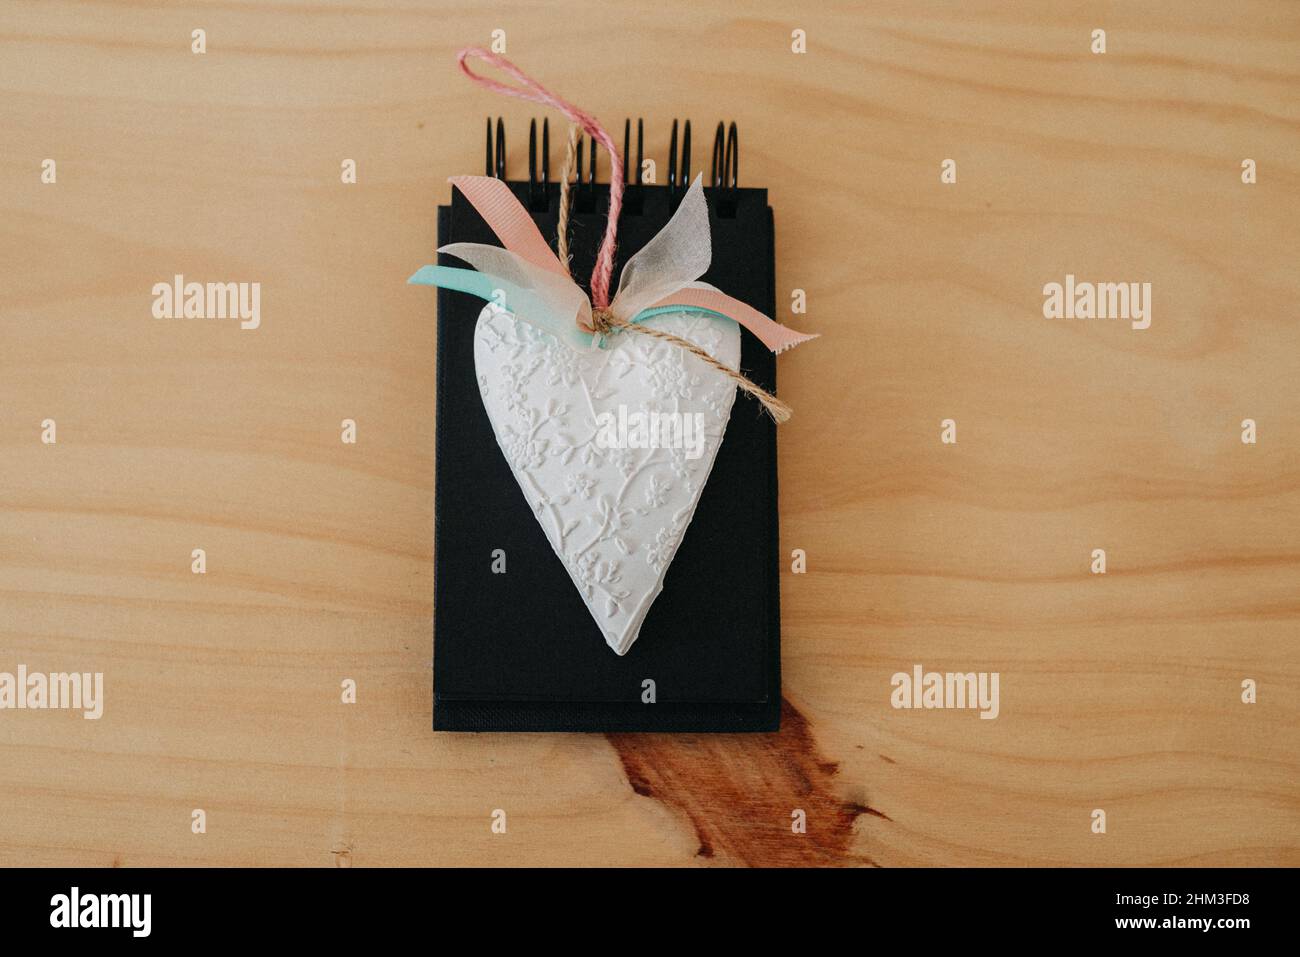 notebook with black sheets with copy space, on a wooden table with a white heart. Stock Photo